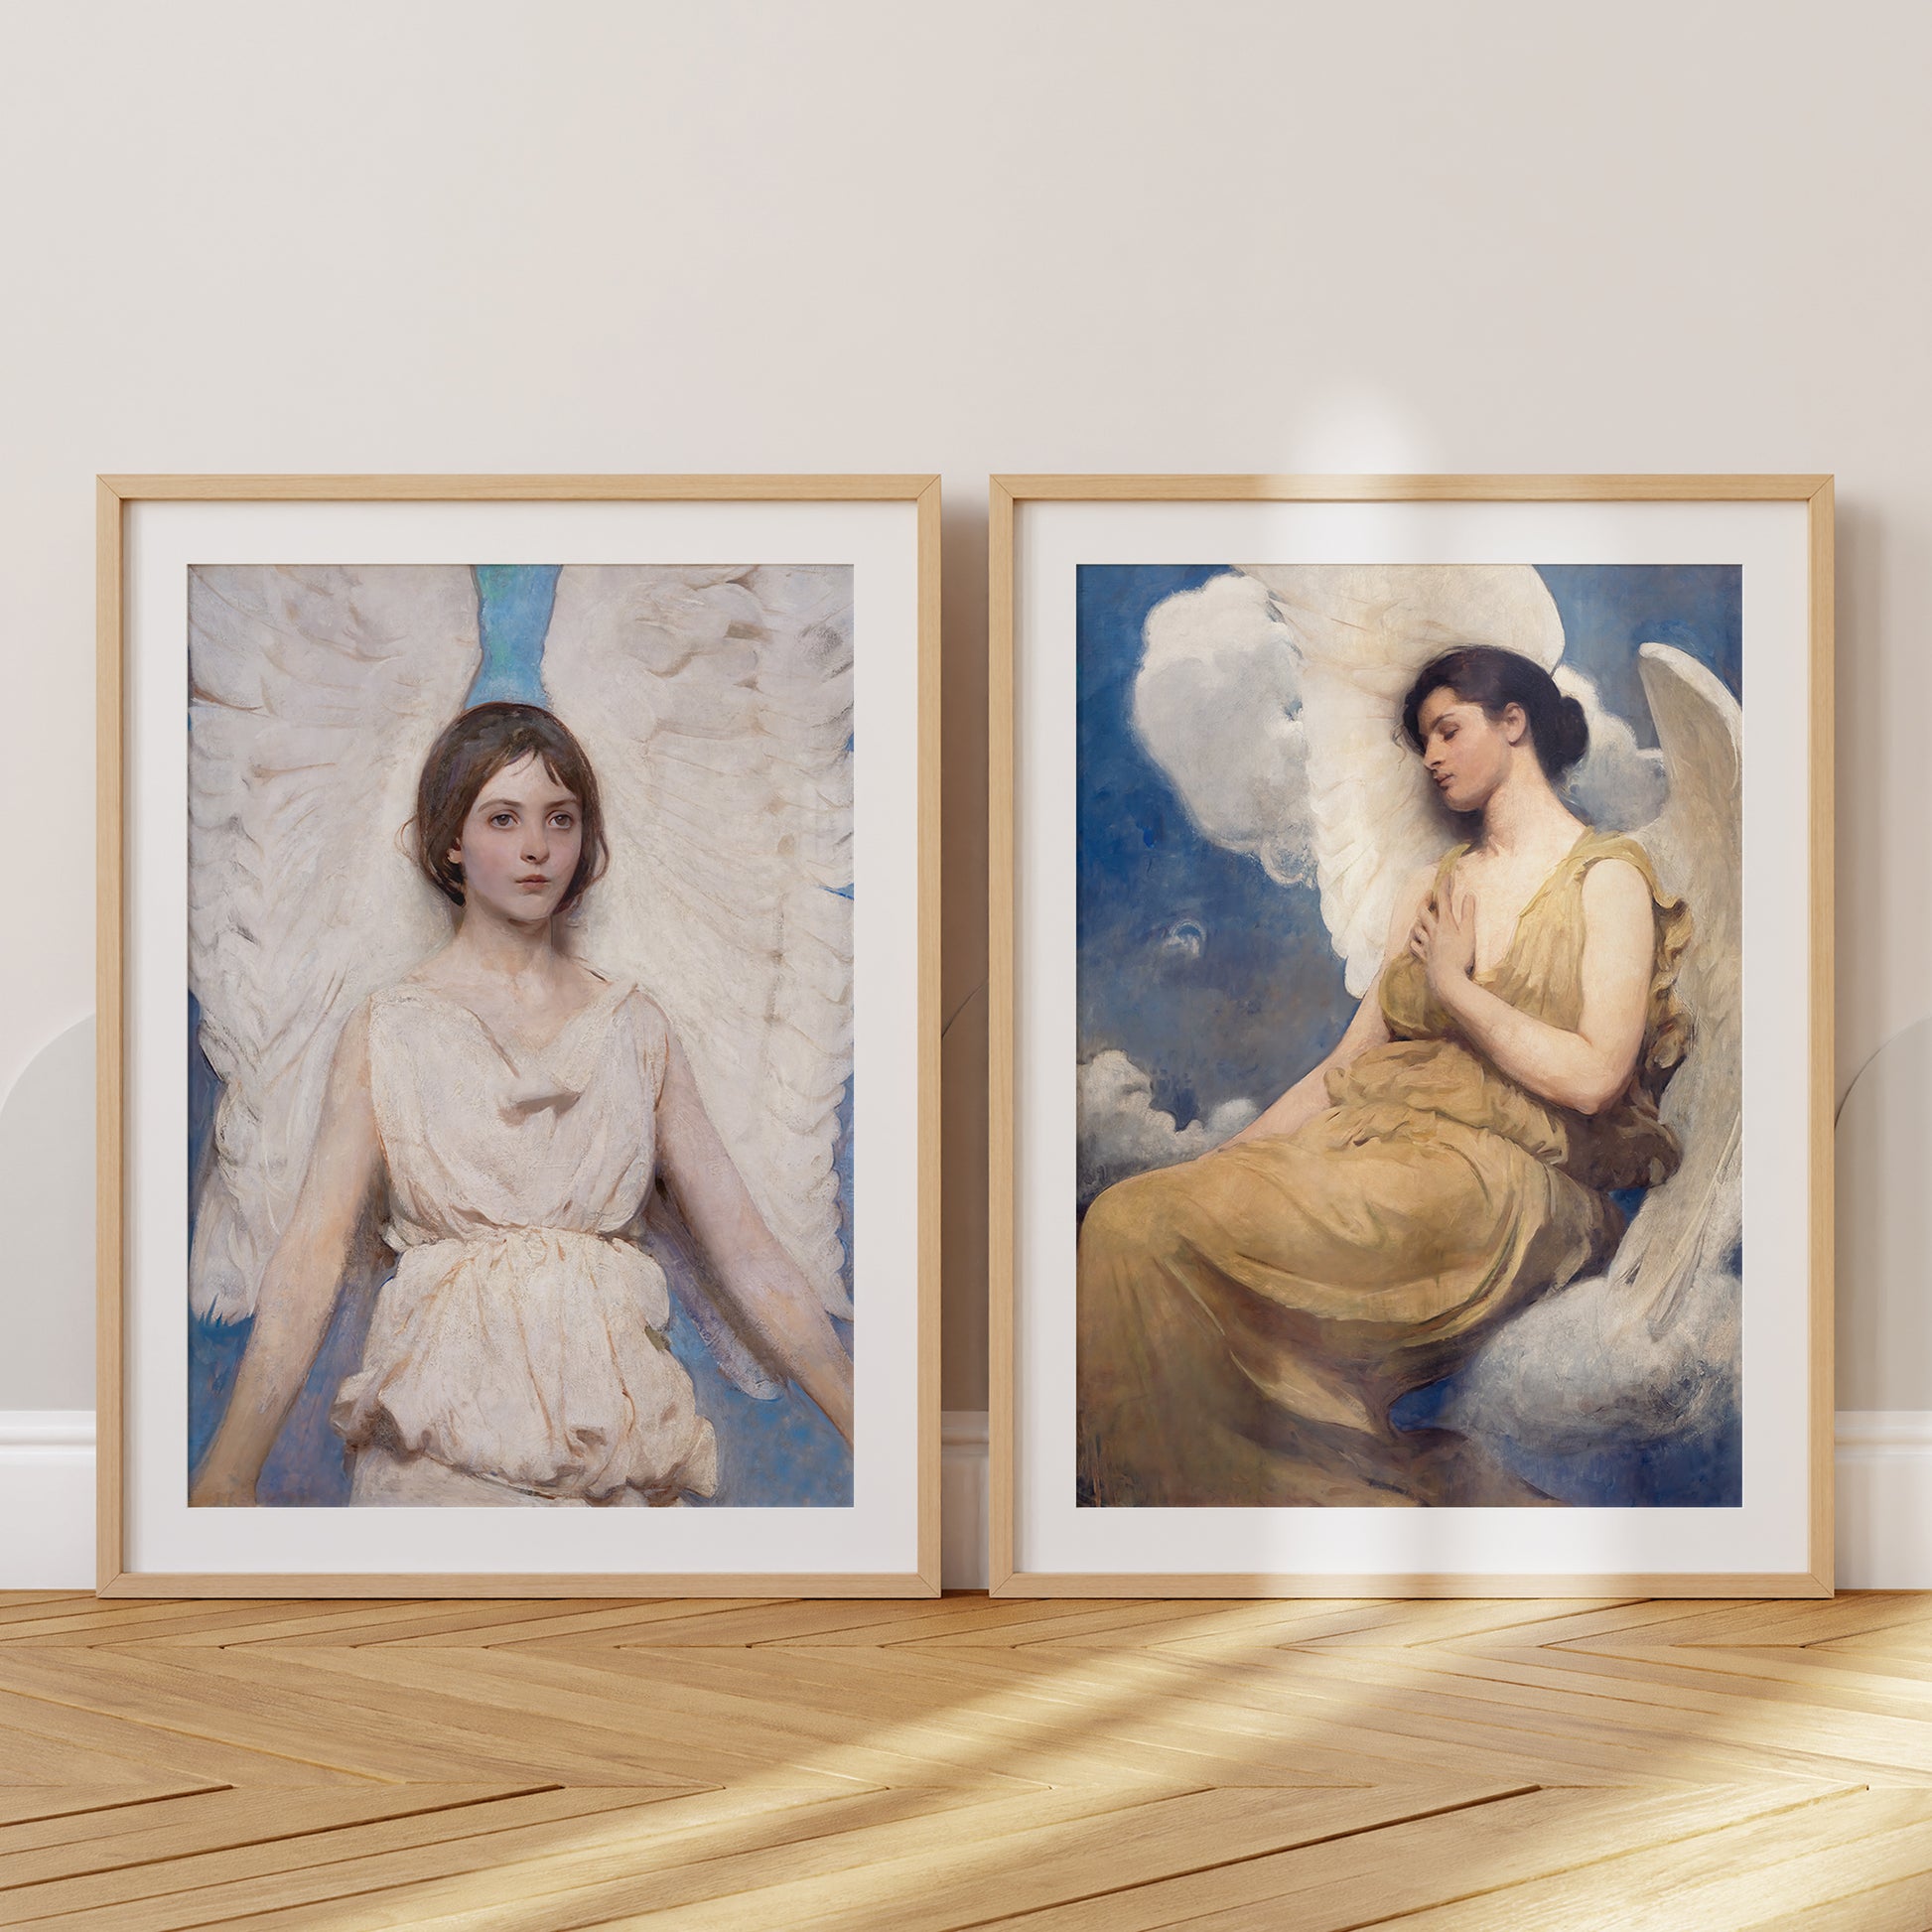 Be inspired by our classic art print Winged Figure by Abbott Handerson Thayer. This artwork was printed using the giclée process on archival acid-free paper and is presented in a set of two oak frames with passe-partout that captures its timeless beauty in every detail.